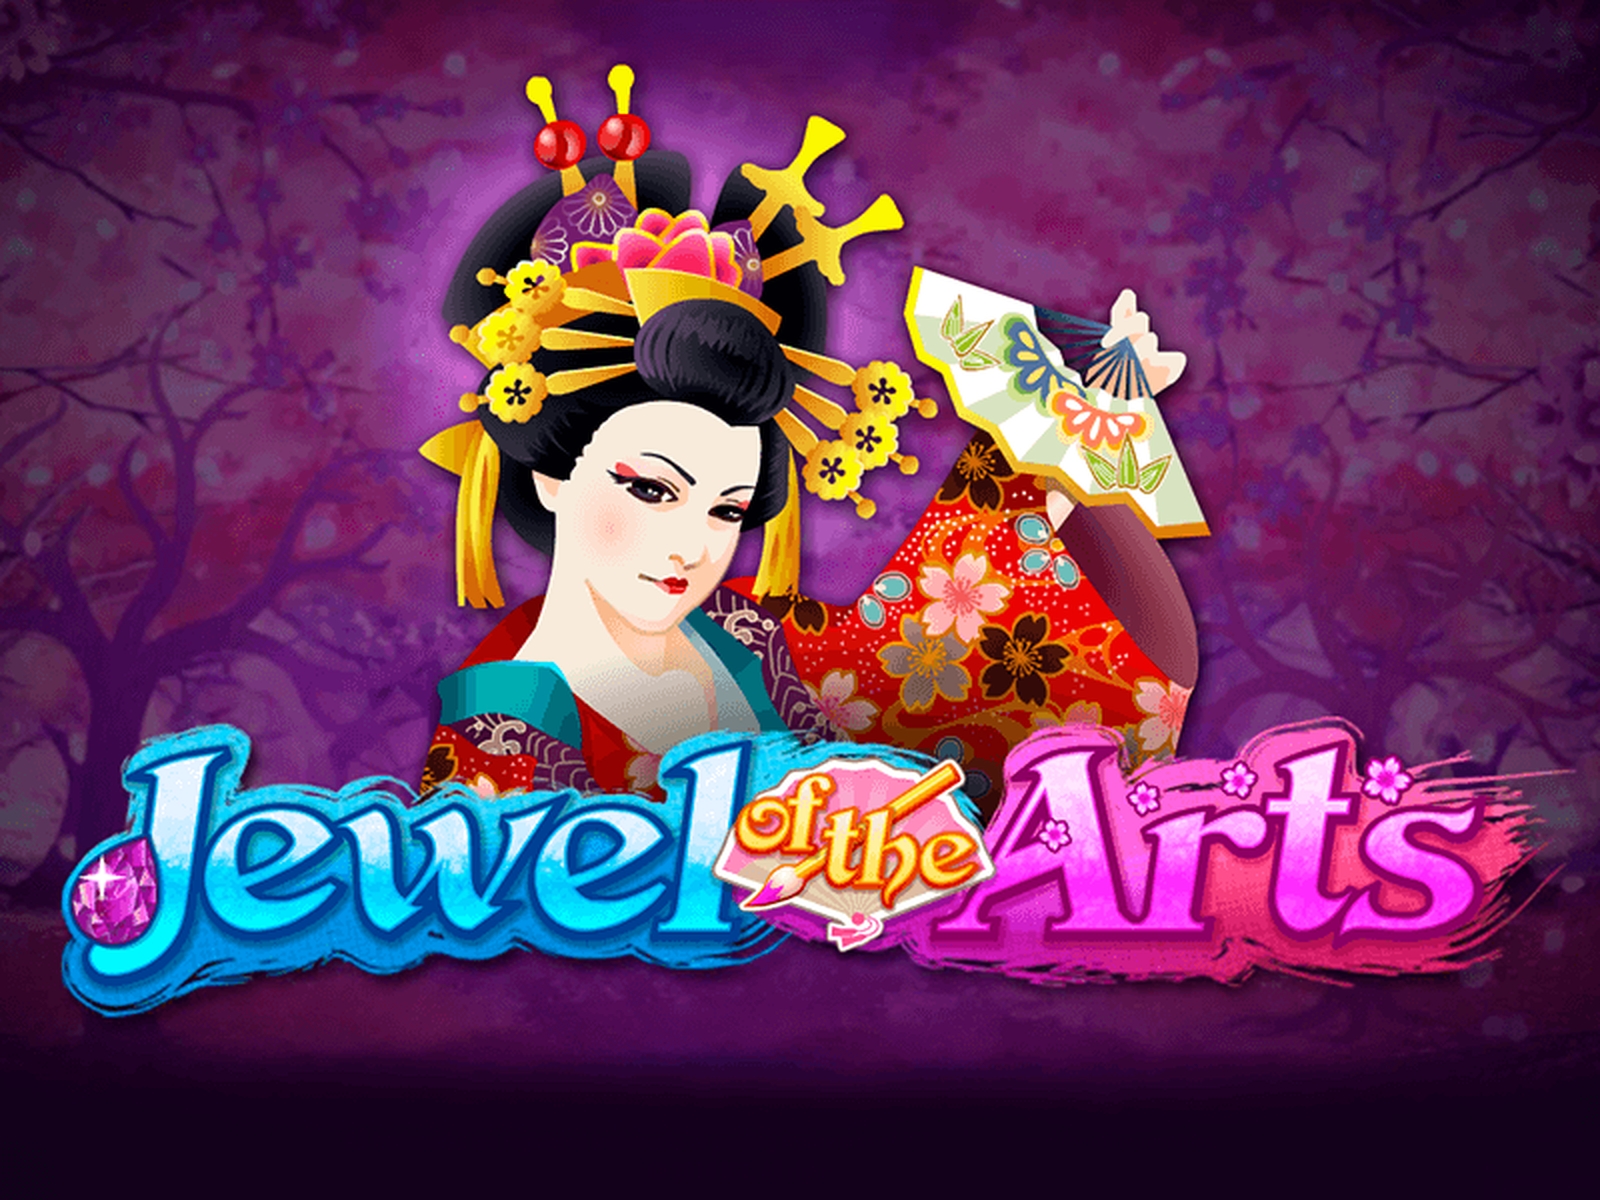 The Jewel of the Arts Online Slot Demo Game by IGT